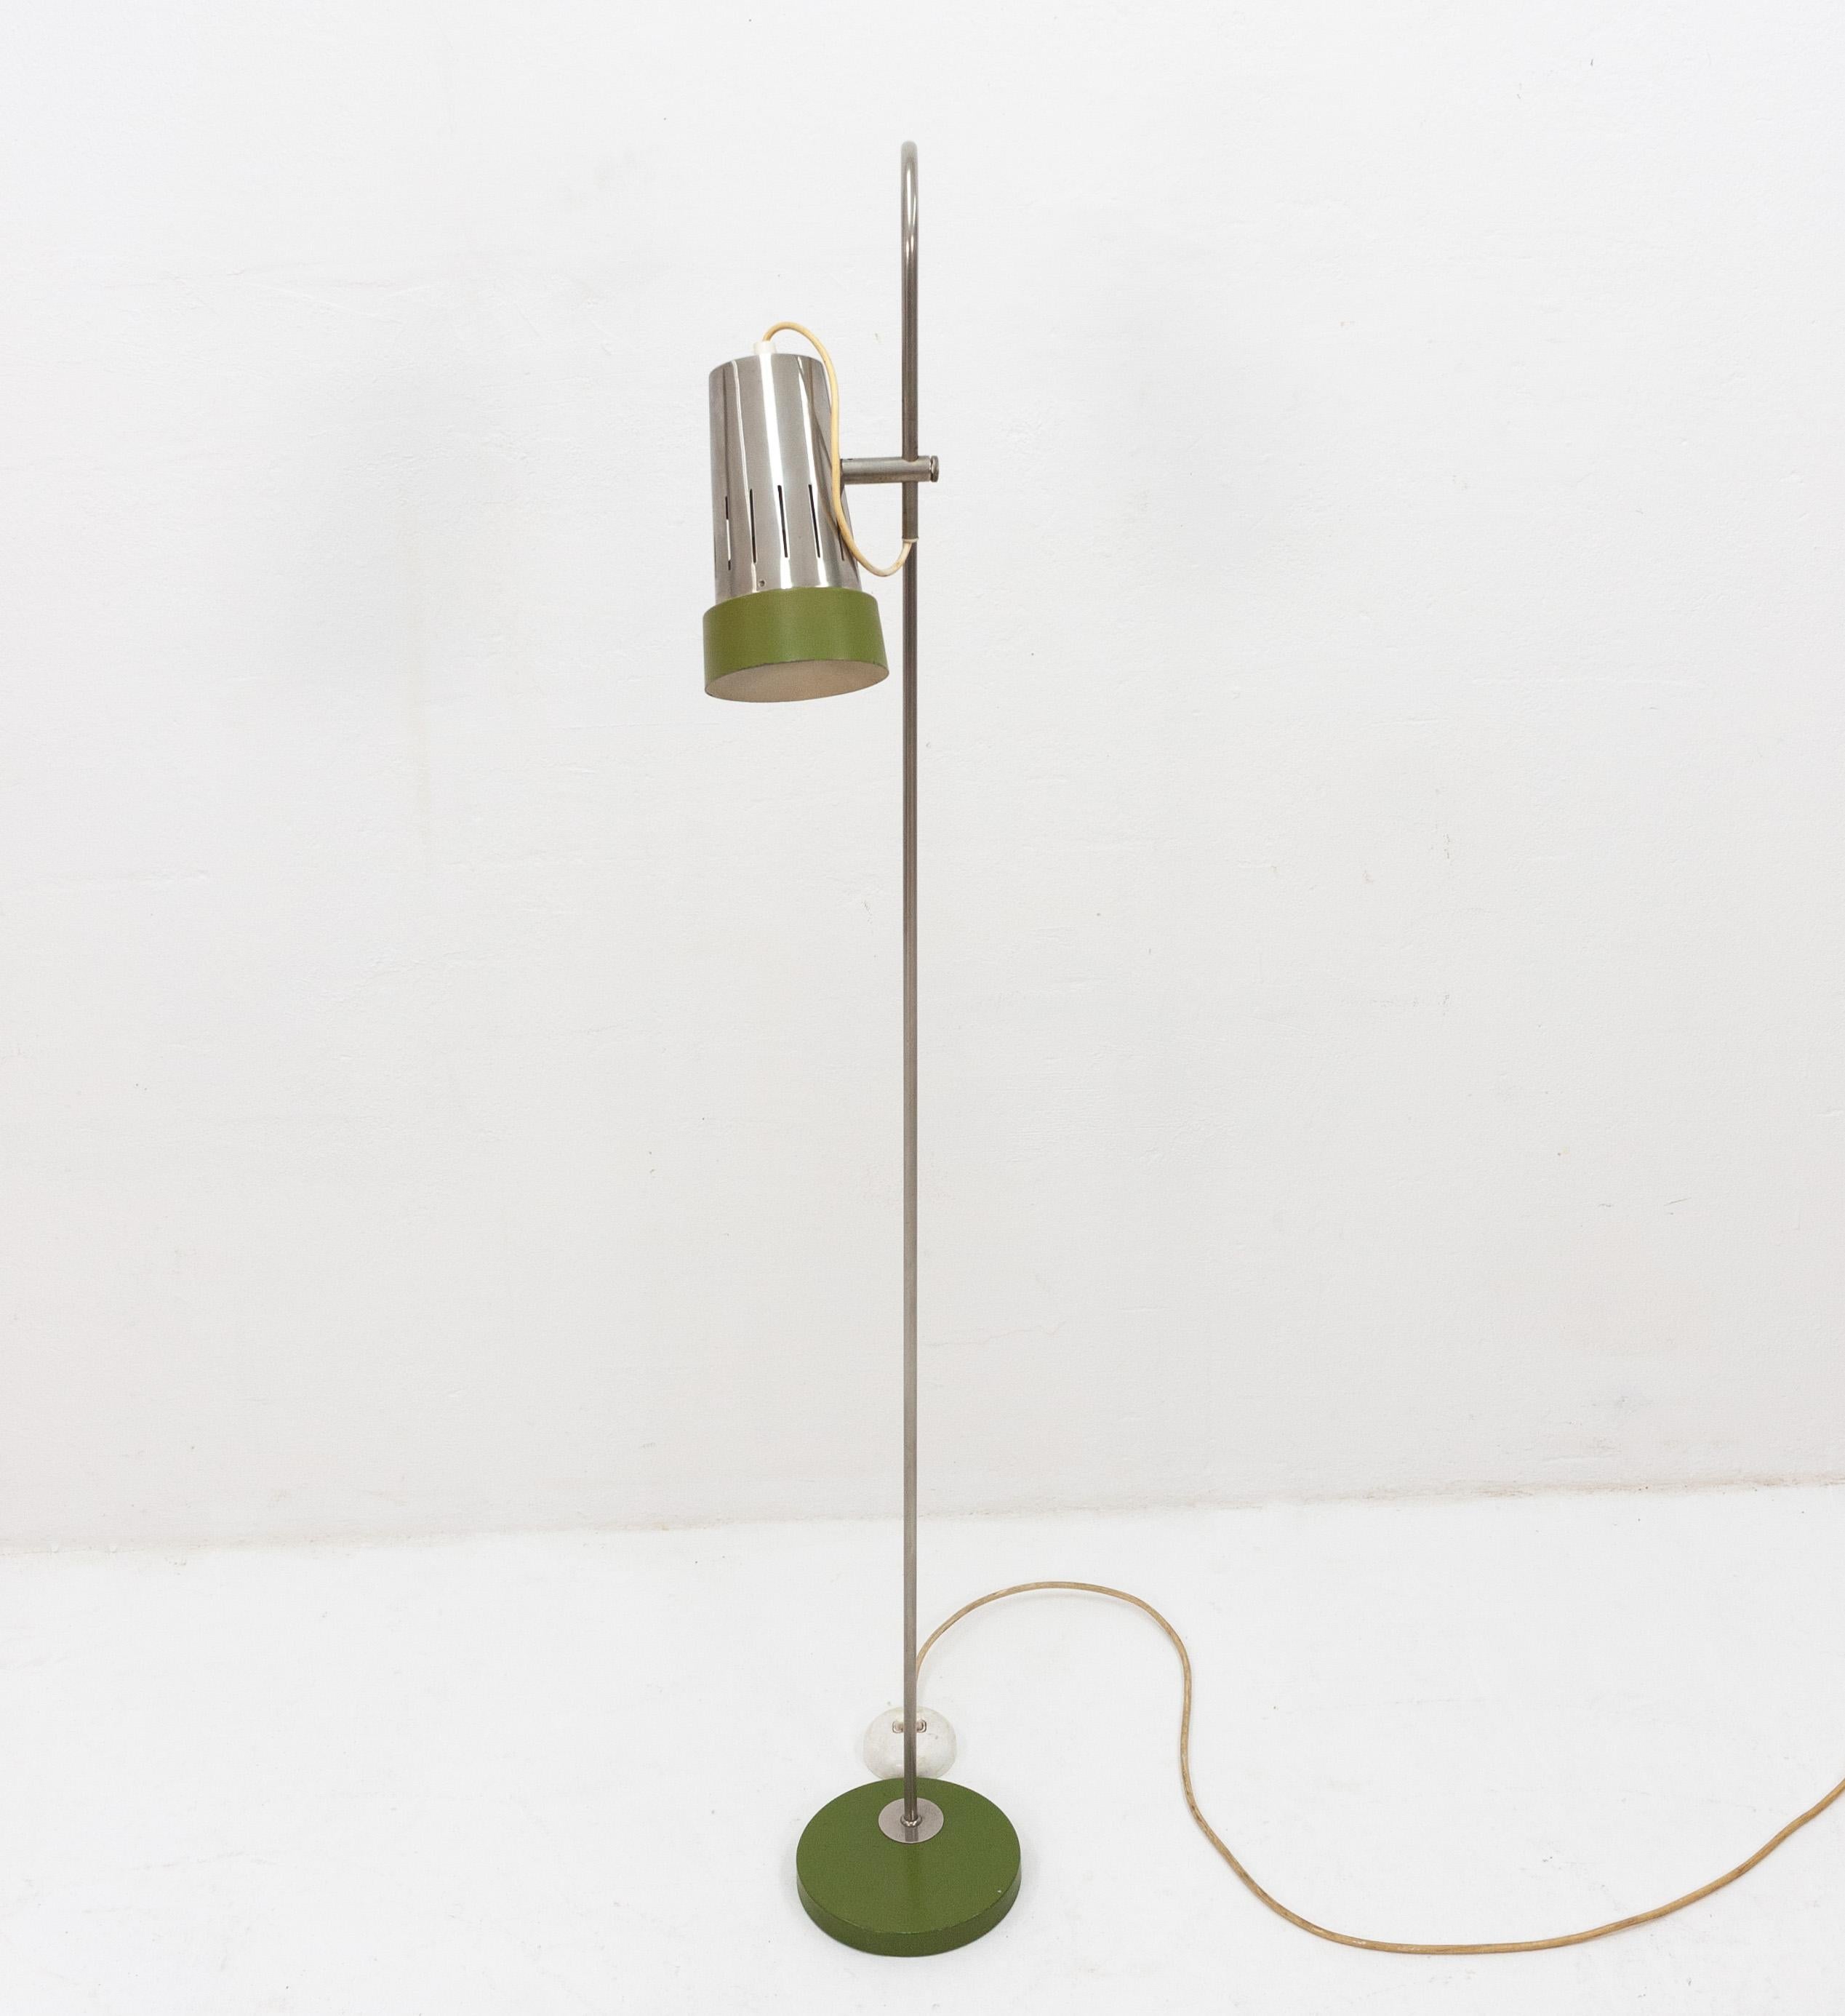 Beautifully designed vintage floor lamp most likely manufactured by the Dutch company Artiforte in the 1960s and featuring a stylish avocado green color. The hood is fully adjustable and can rotate. As a result, this vintage floor lamp is can be